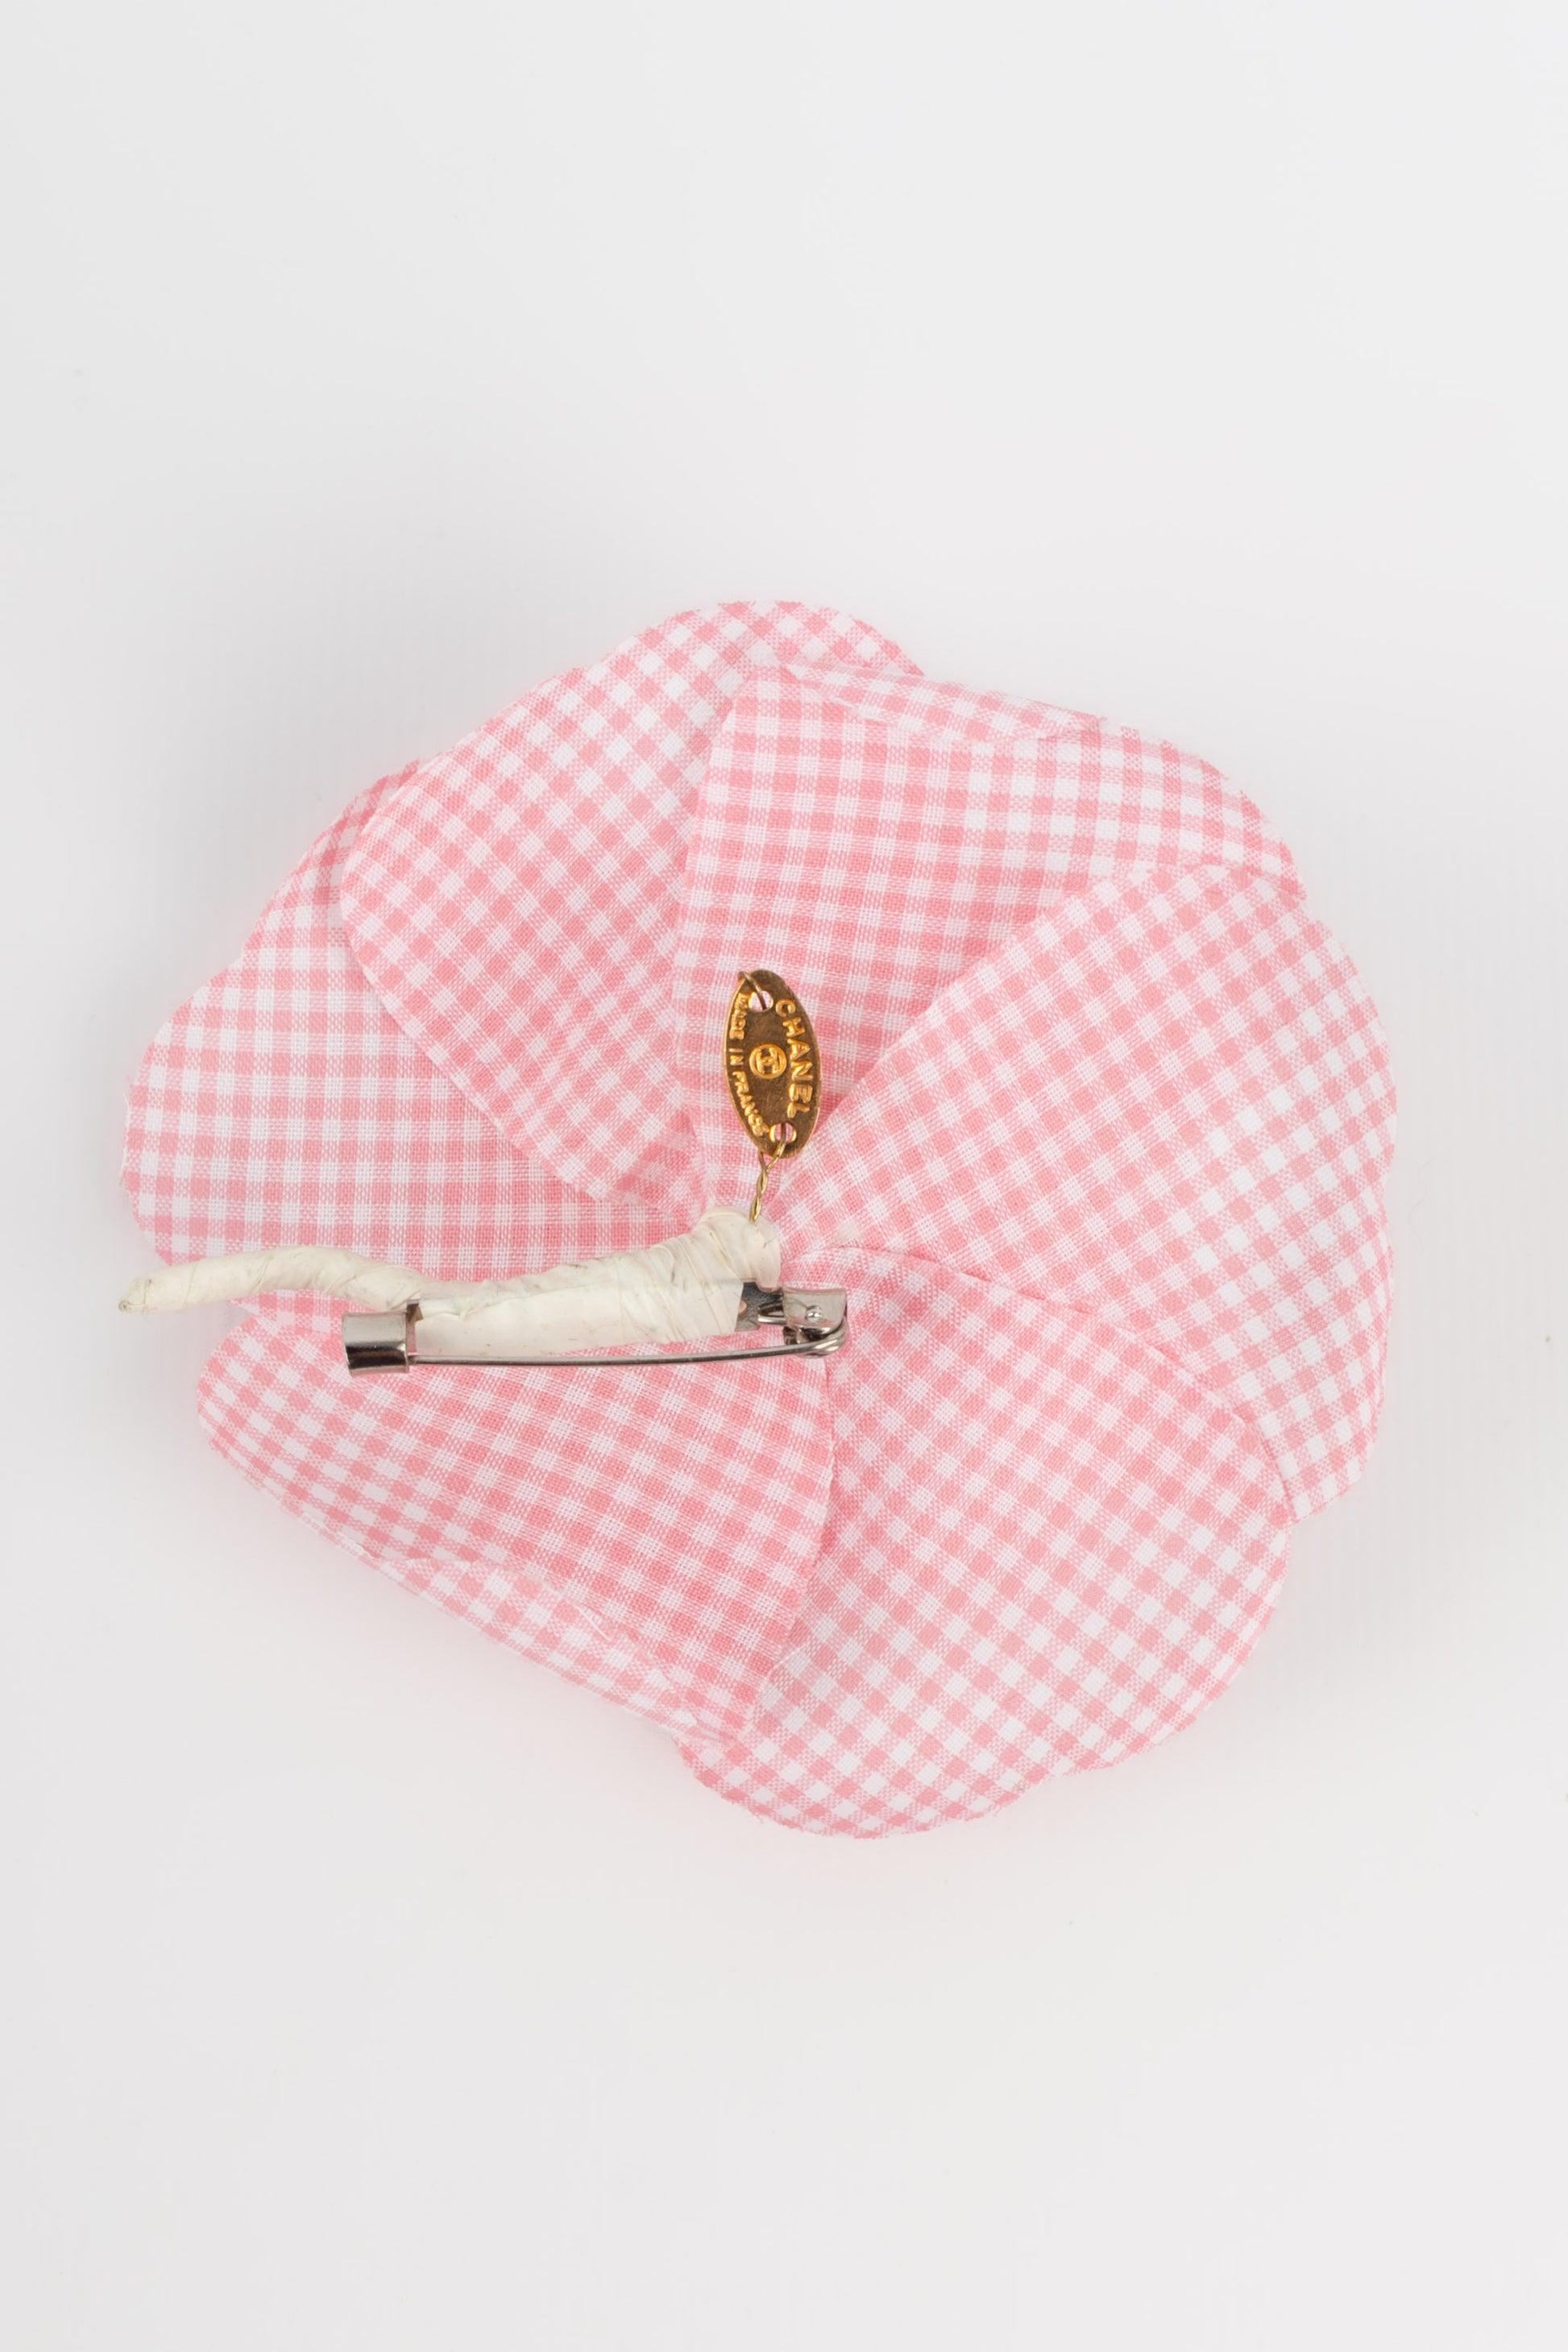 Chanel Camellia Brooch Made of Pink and White Gingham Fabric, 1990s In Excellent Condition For Sale In SAINT-OUEN-SUR-SEINE, FR